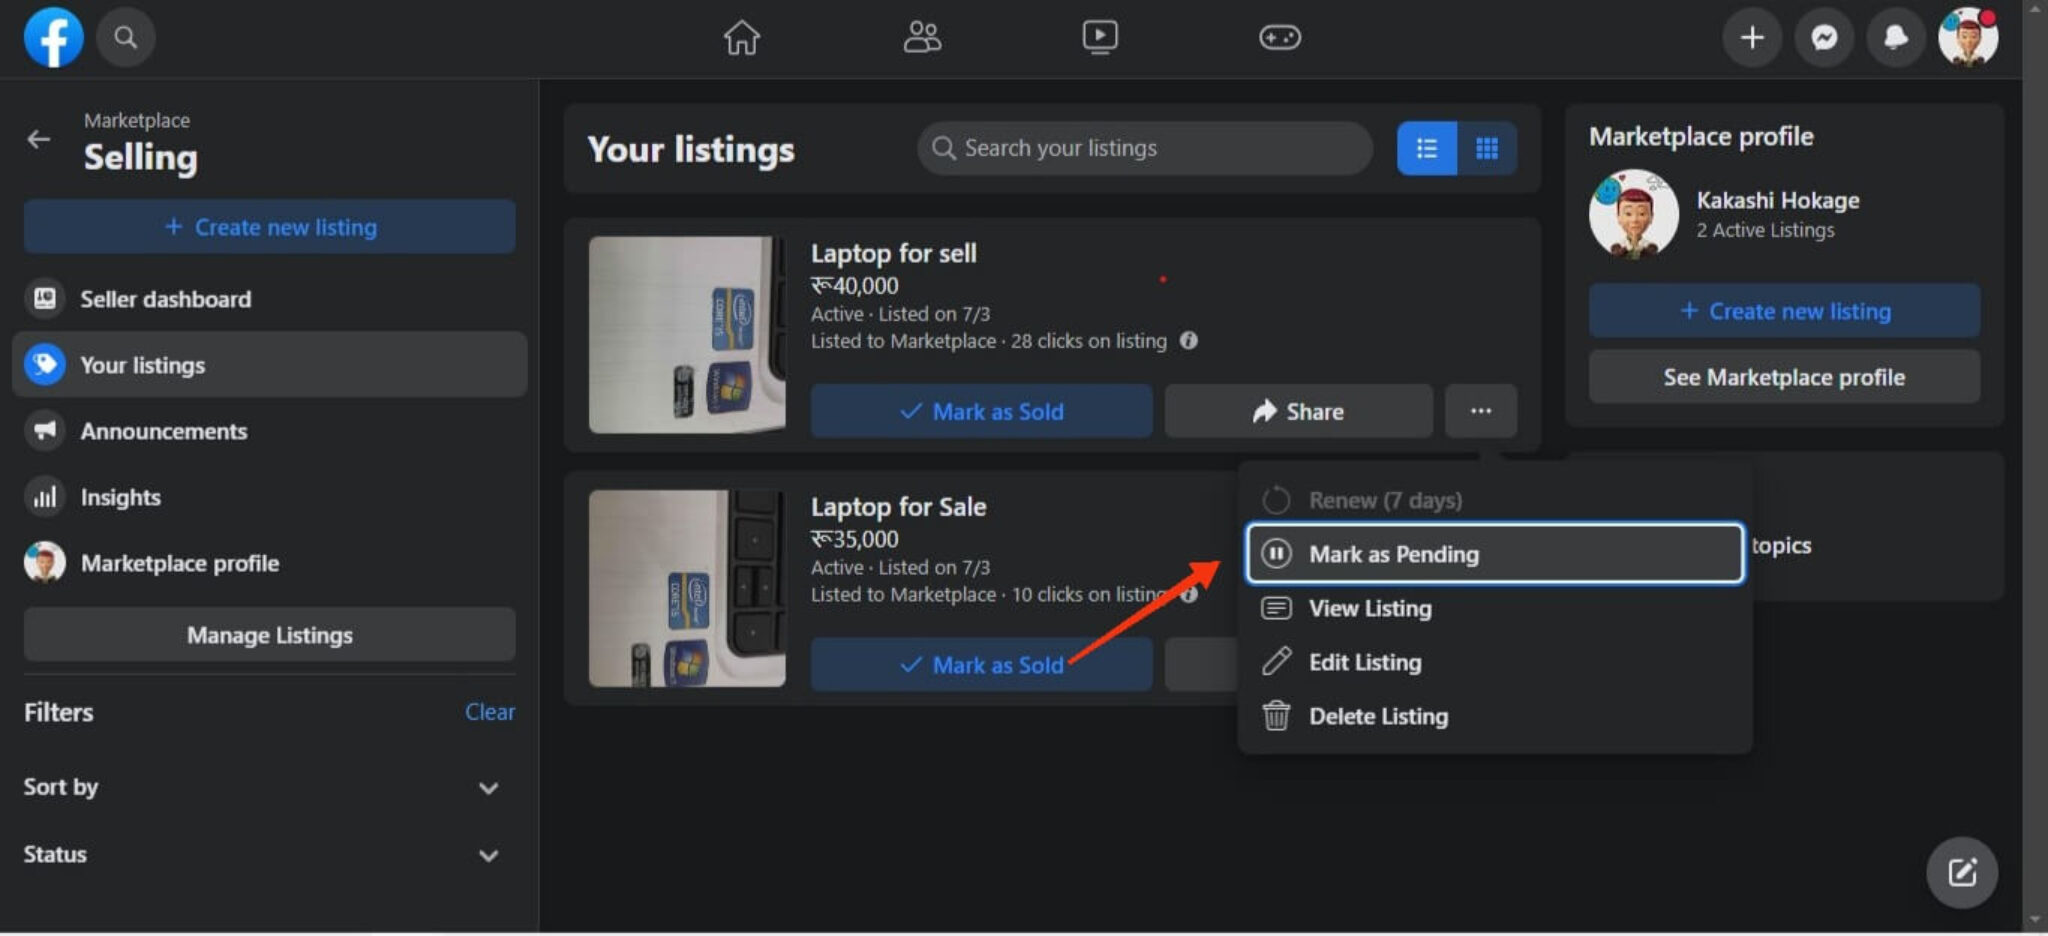 What Does Pending Mean On Facebook Marketplace? TechUnow